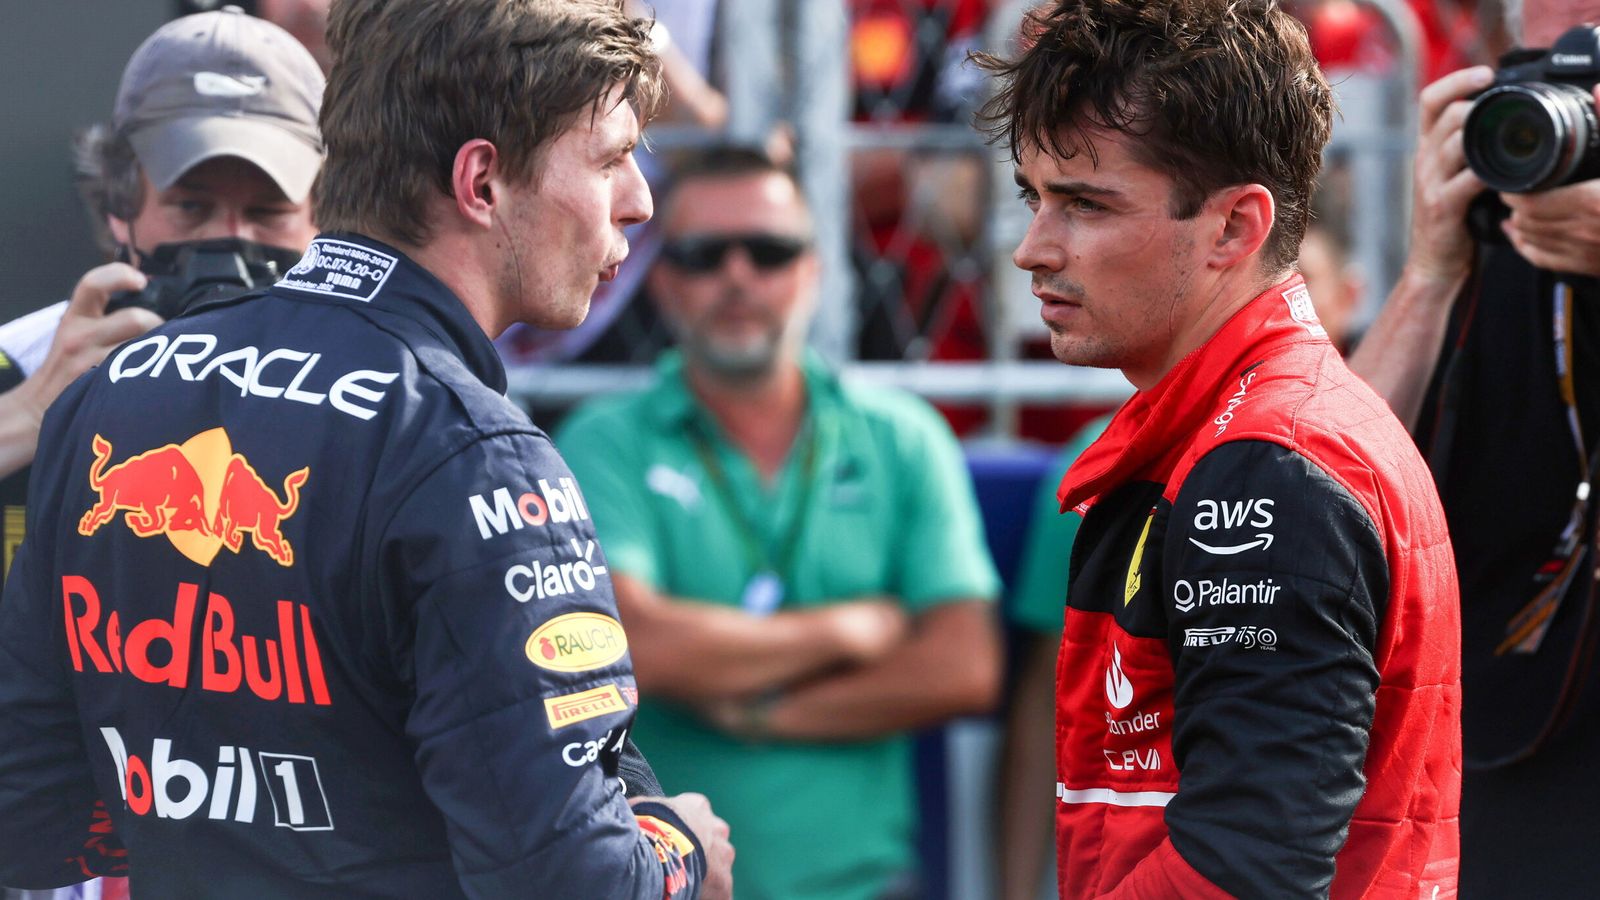 Over Sainz and Russell, Leclerc sides with displeased Verstappen